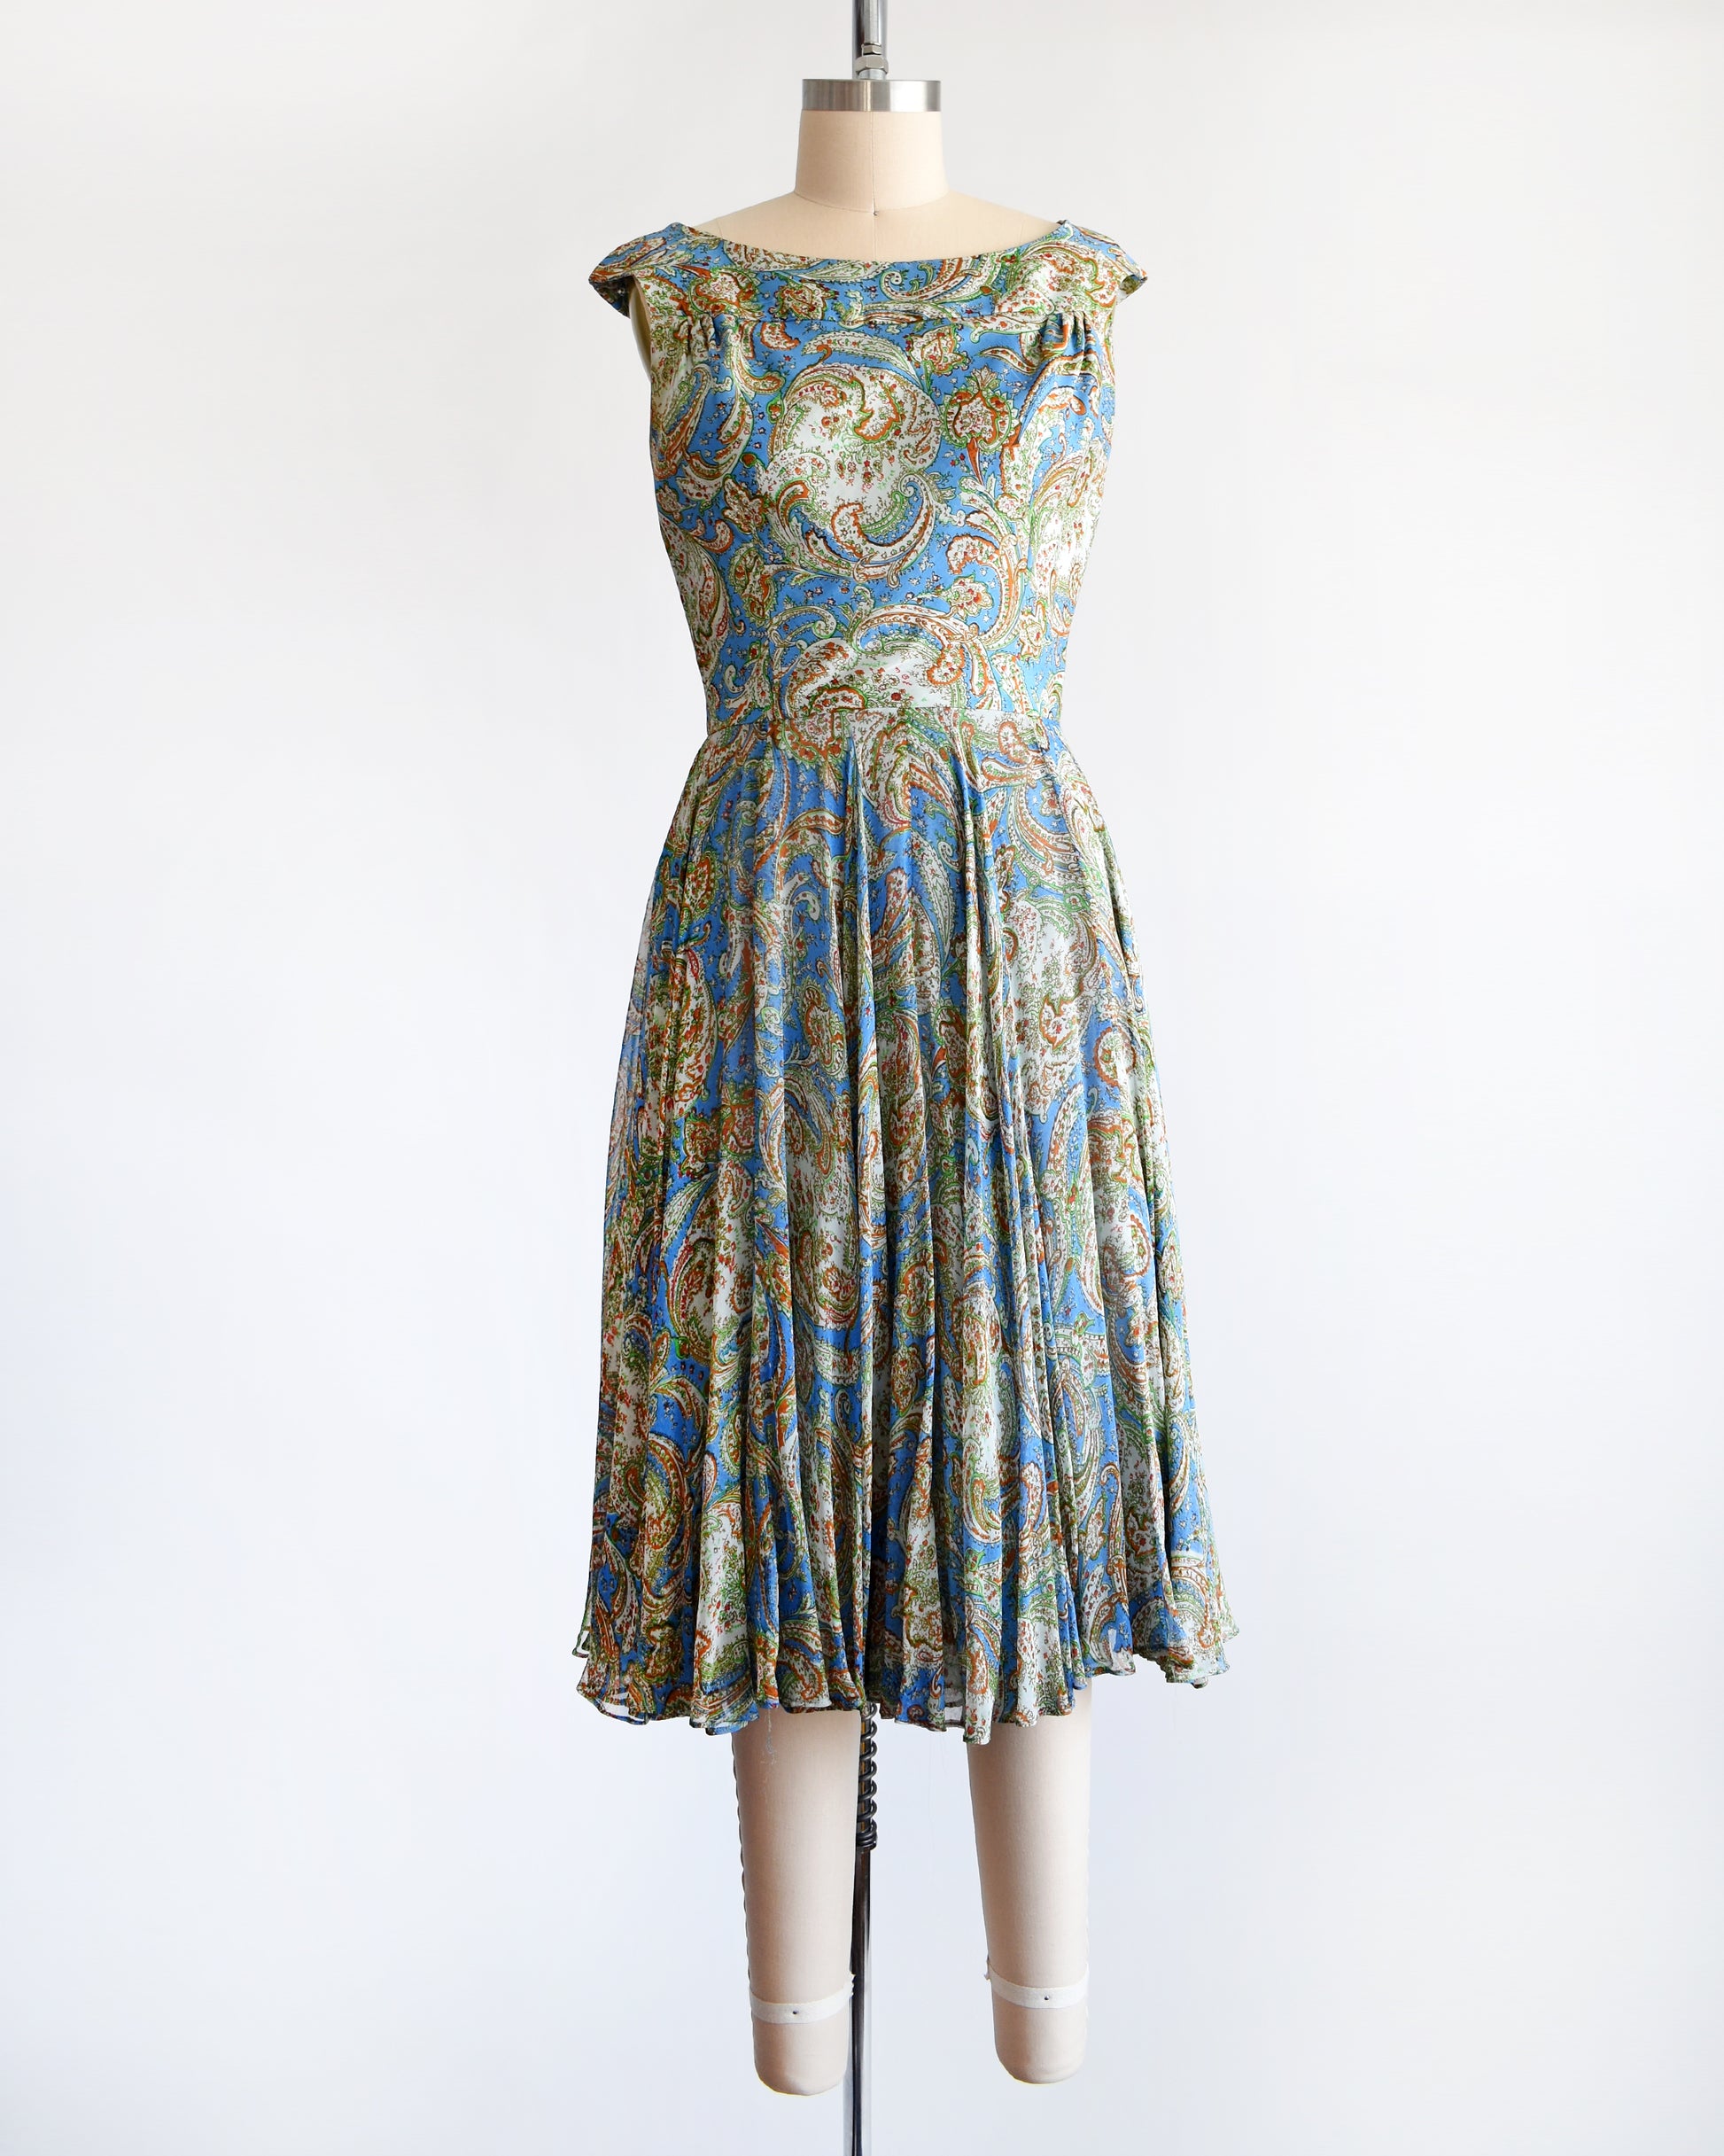 a vintage 1950s silk paisley dress set by Saks Fifth Avenue. the jacket is off in this photo